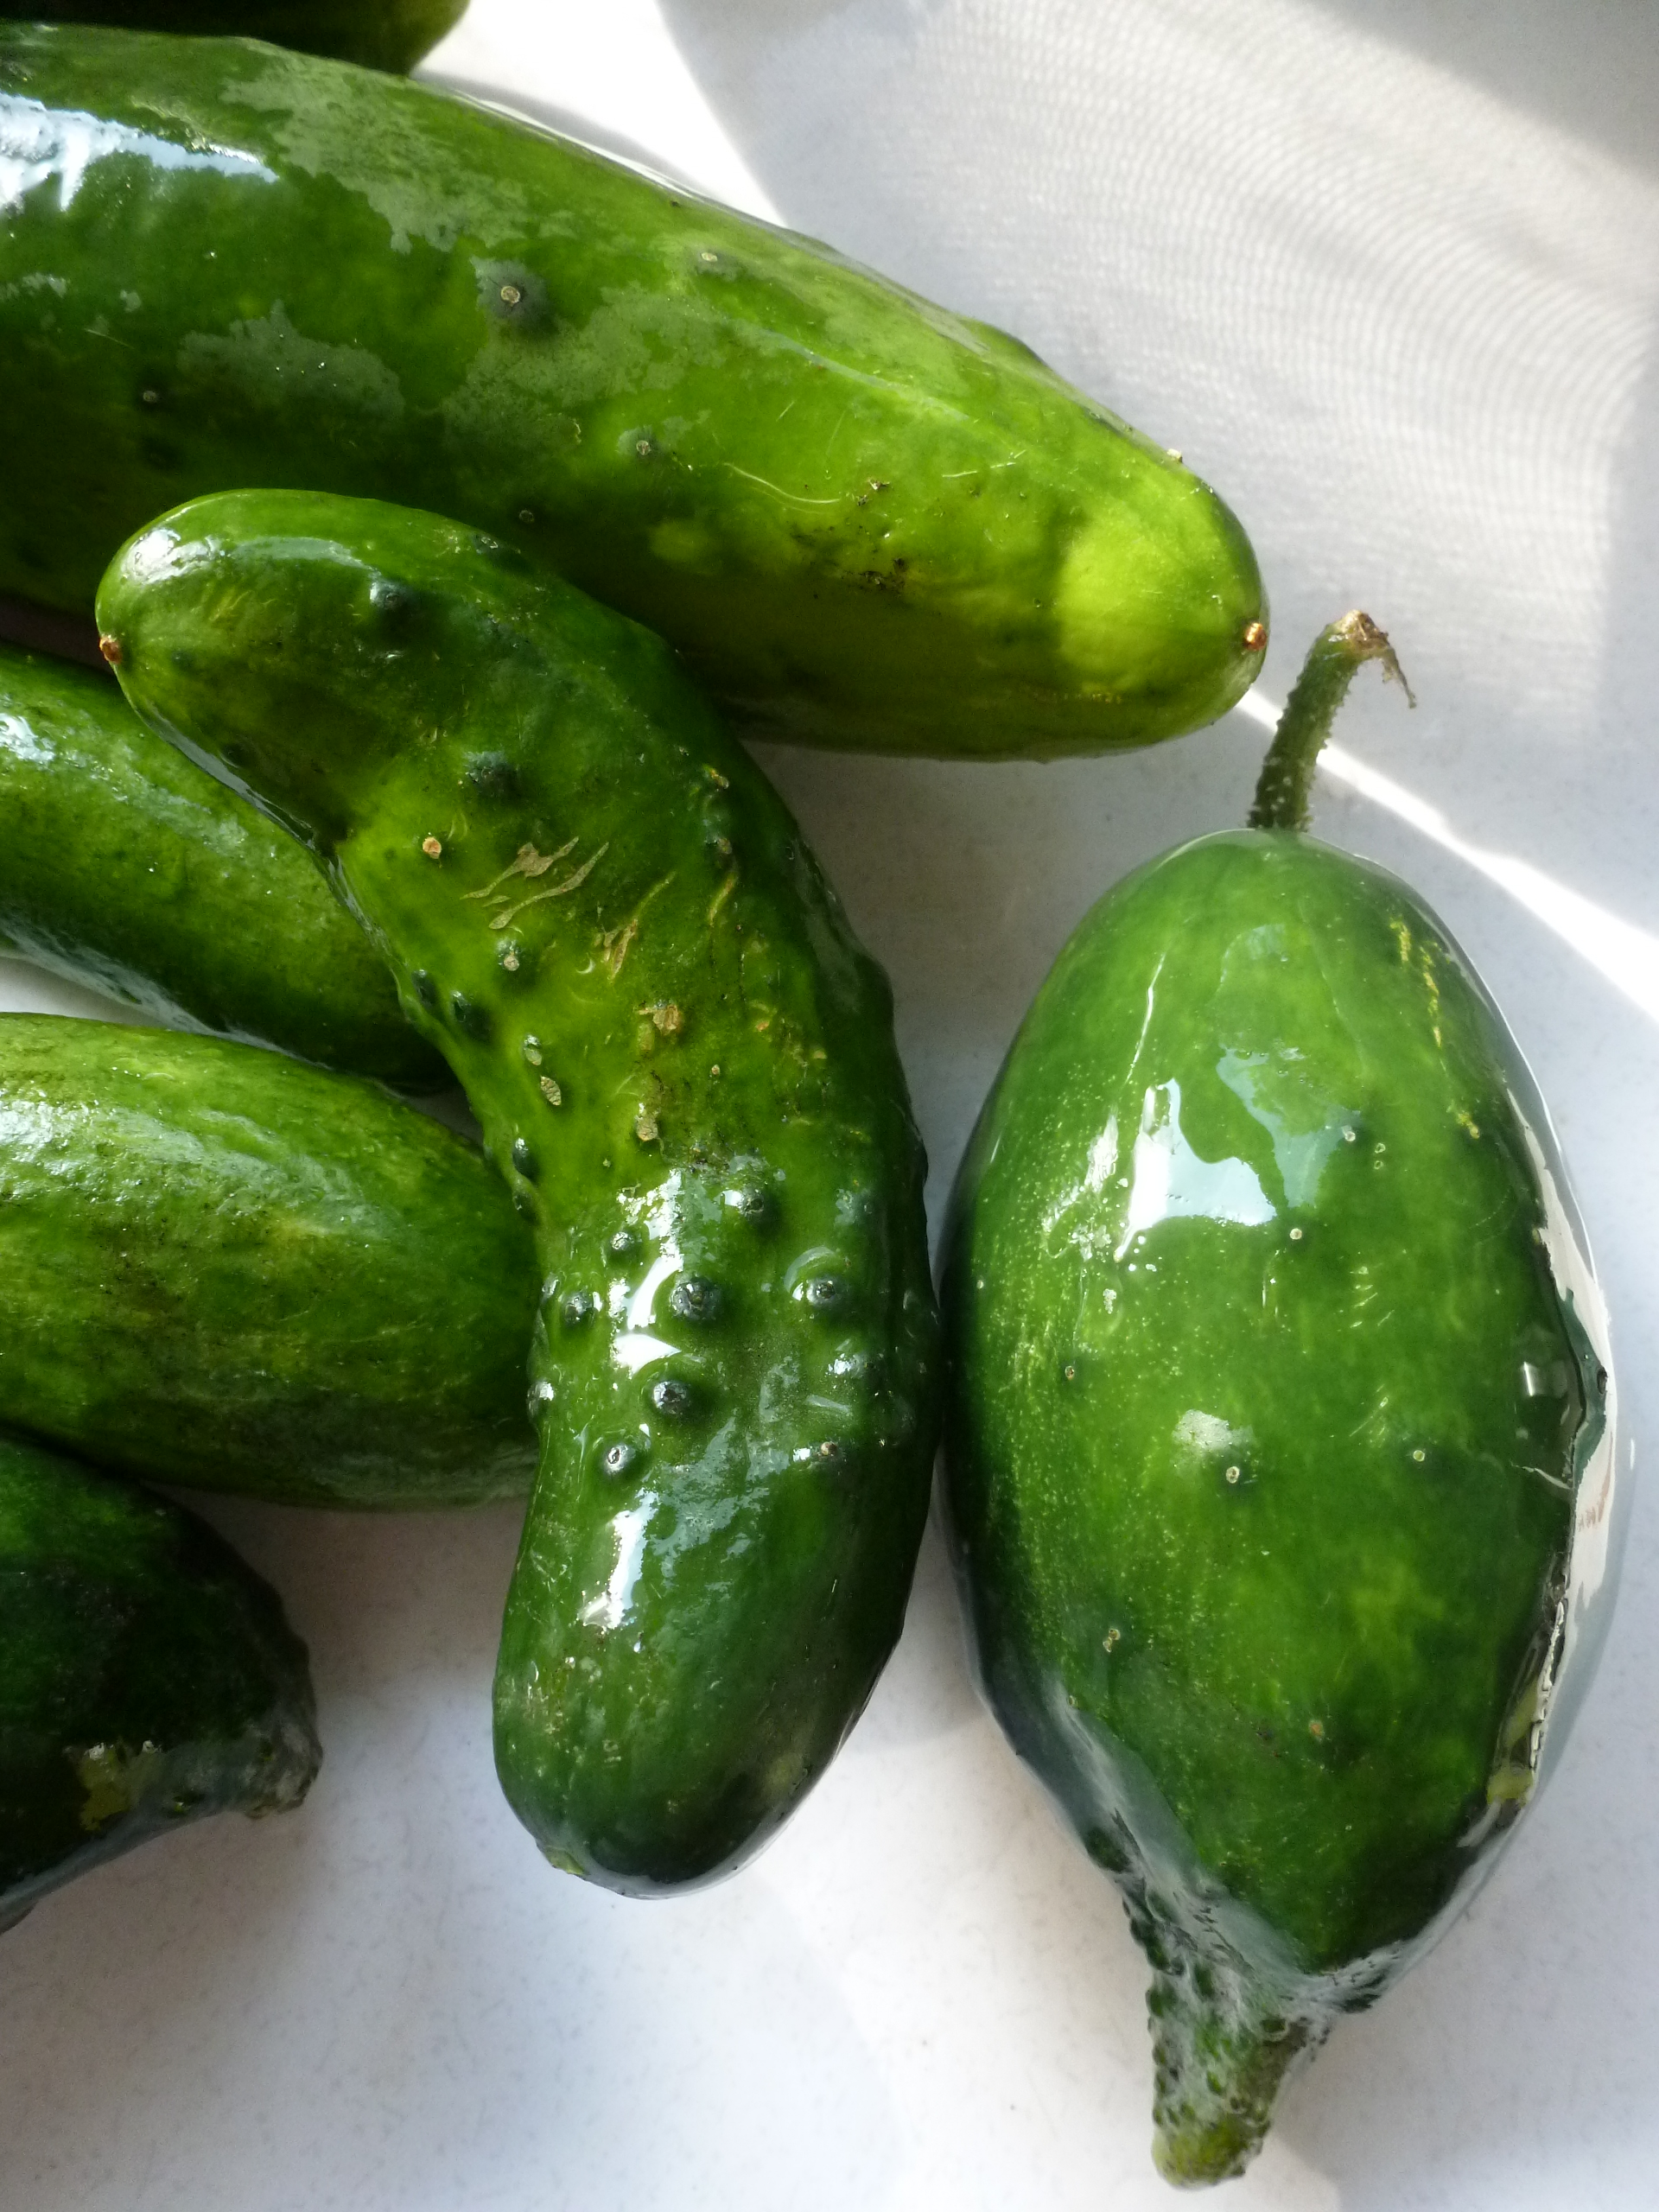 Little cucumbers from Tipi Creek